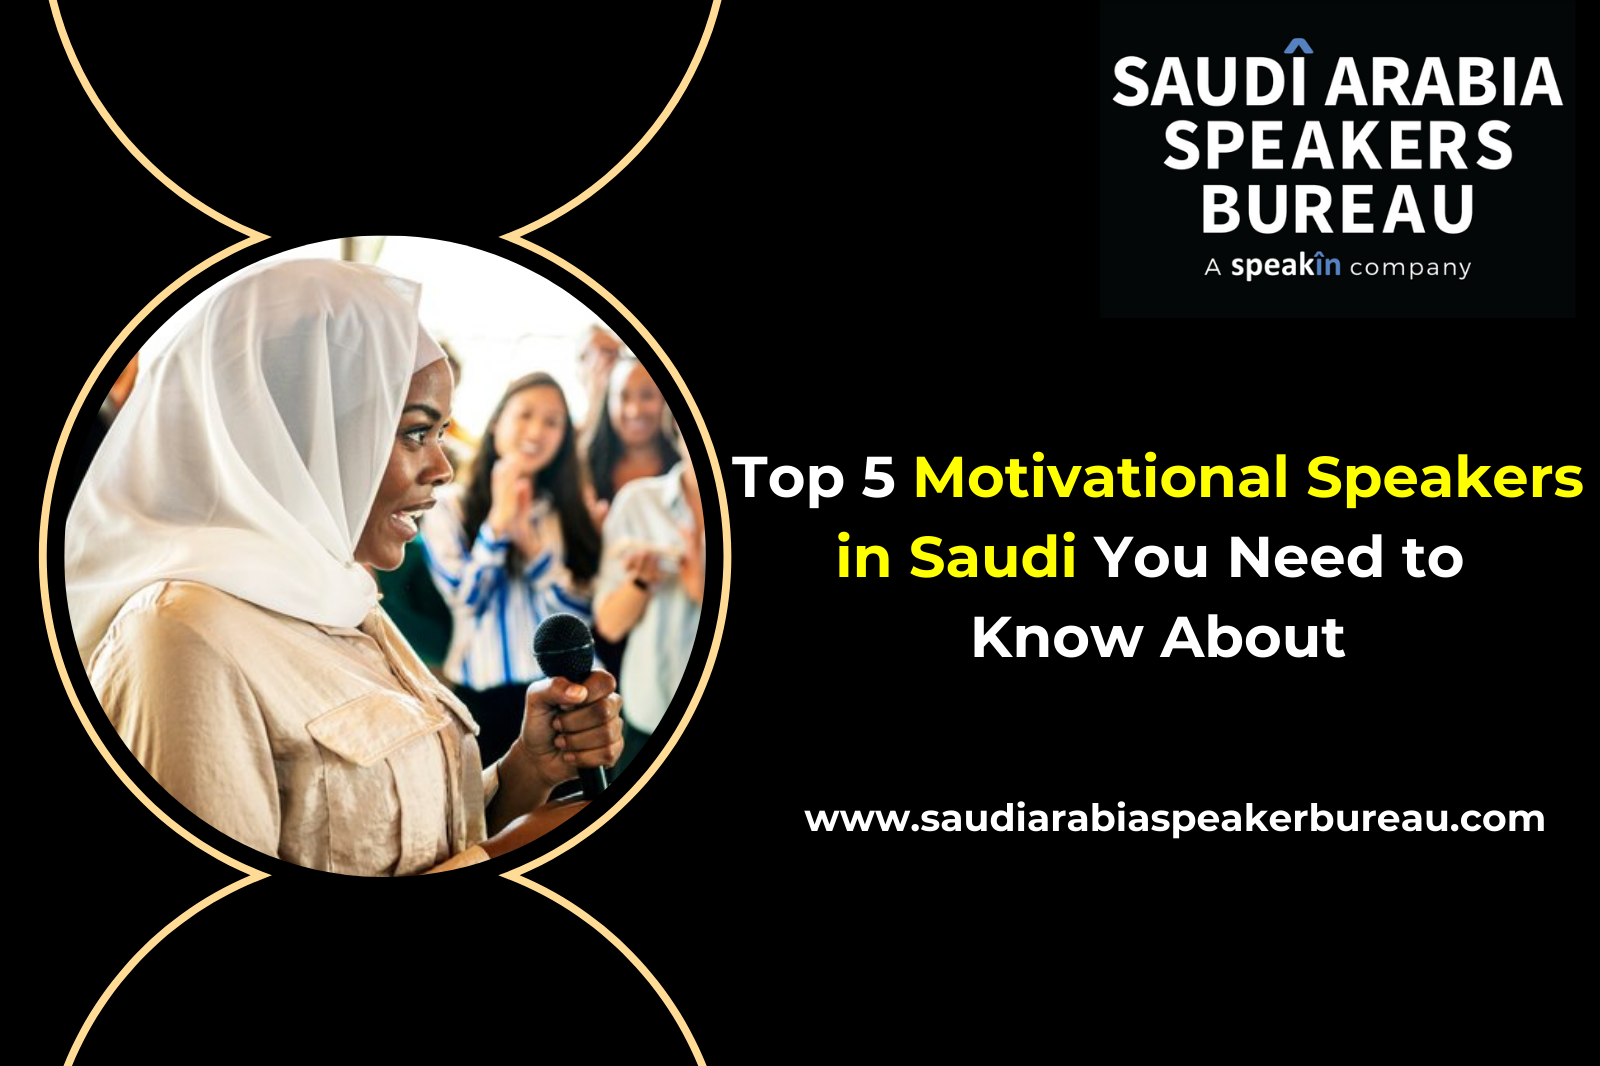 Top 5 Motivational Speakers in Saudi You Need to Know About